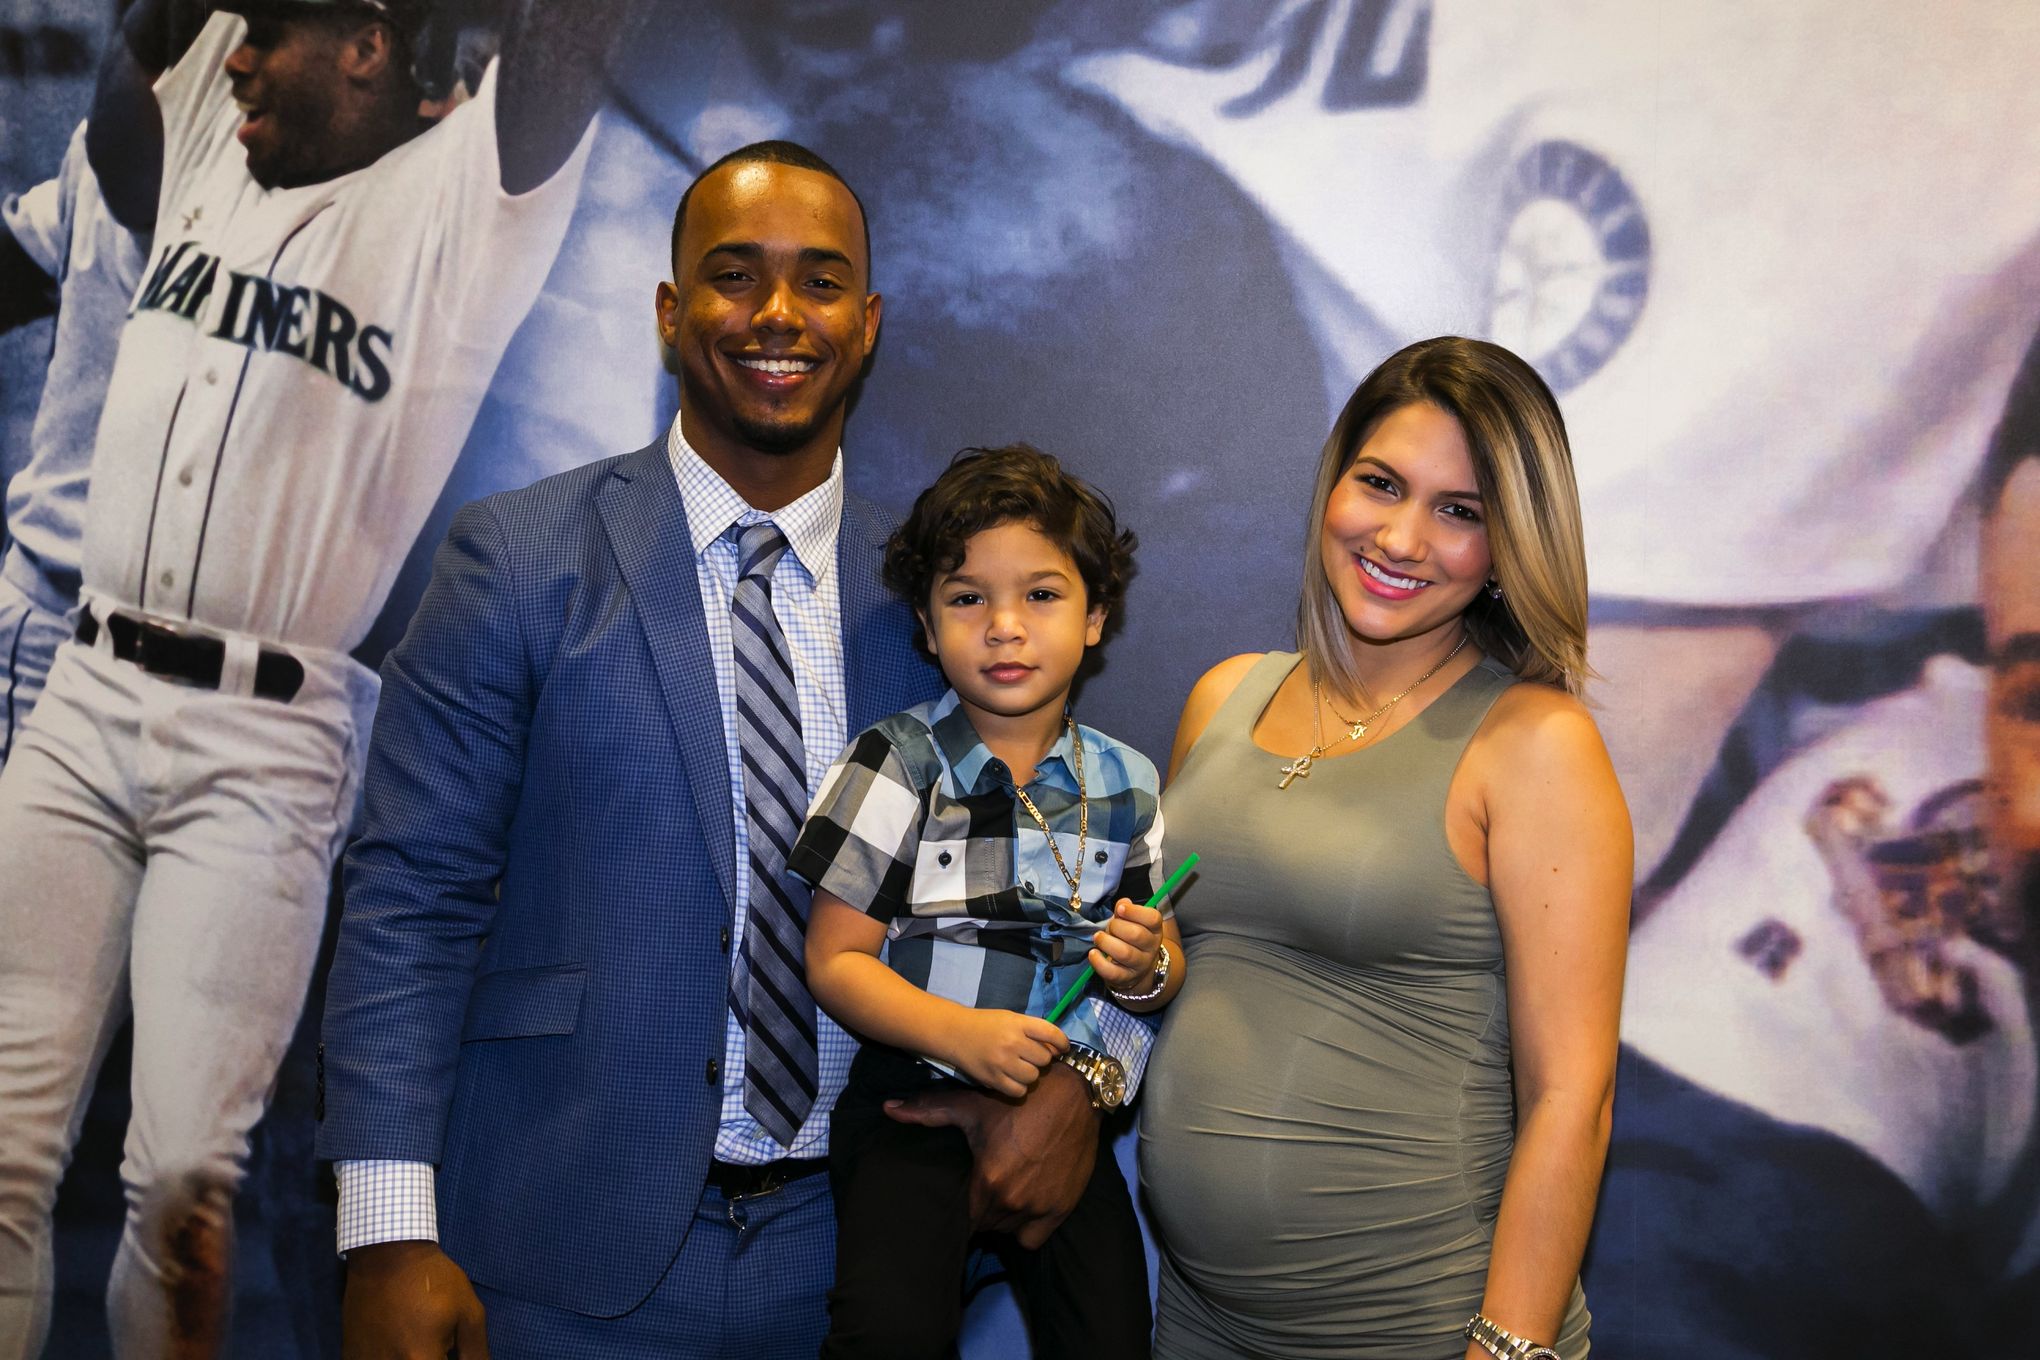 MLB report: Brewers' Segura on leave after son's death